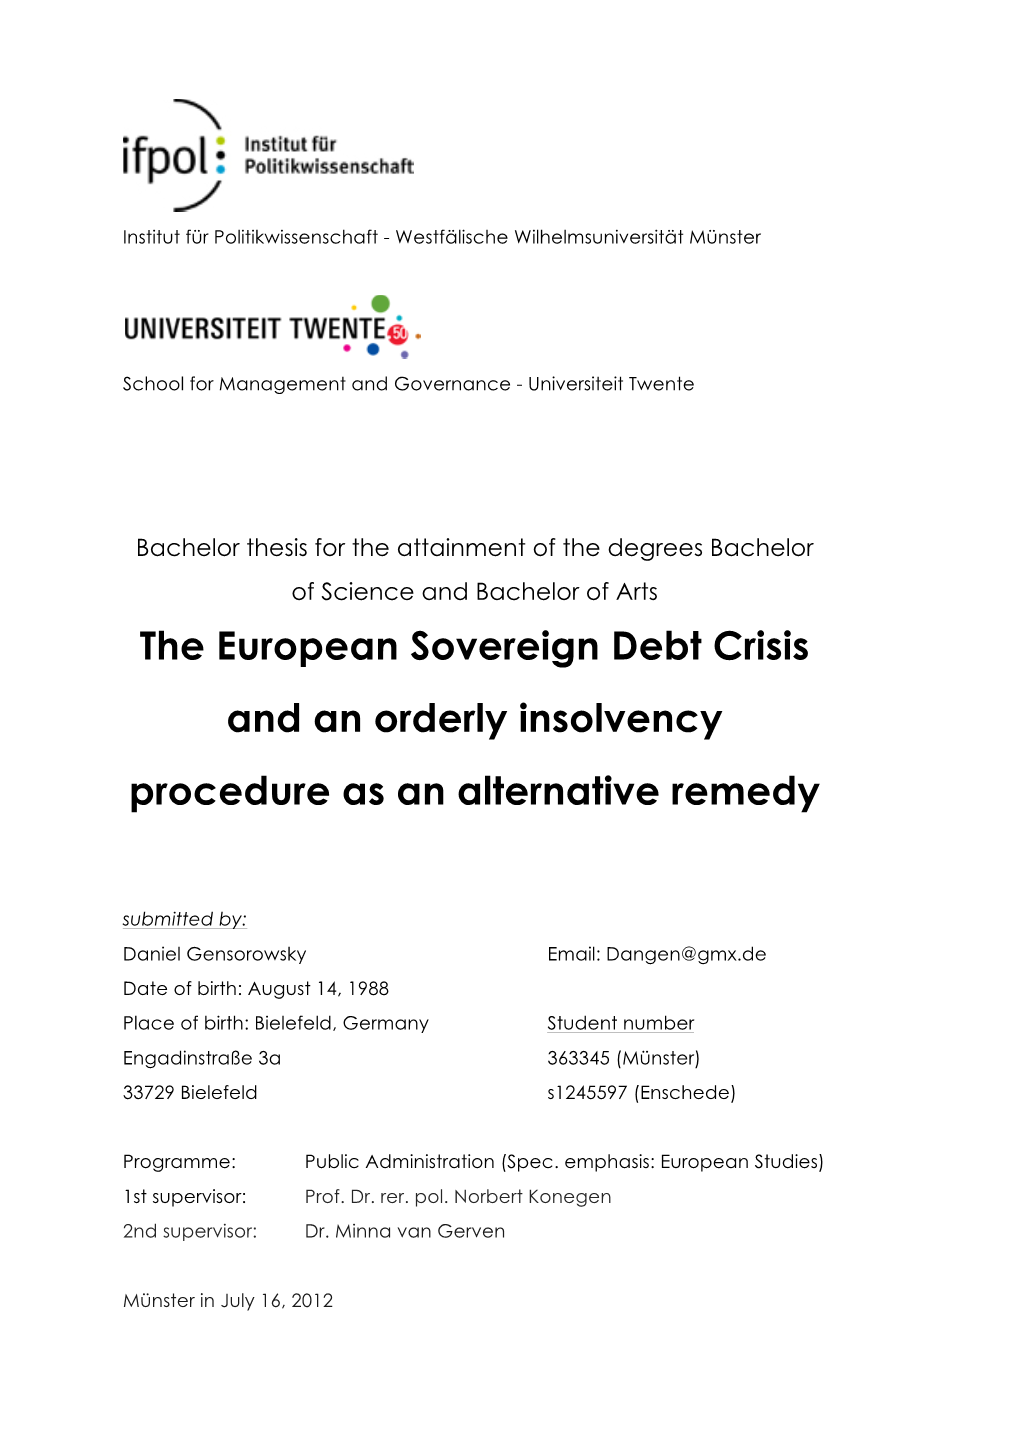 The European Sovereign Debt Crisis and an Orderly Insolvency Procedure As an Alternative Remedy